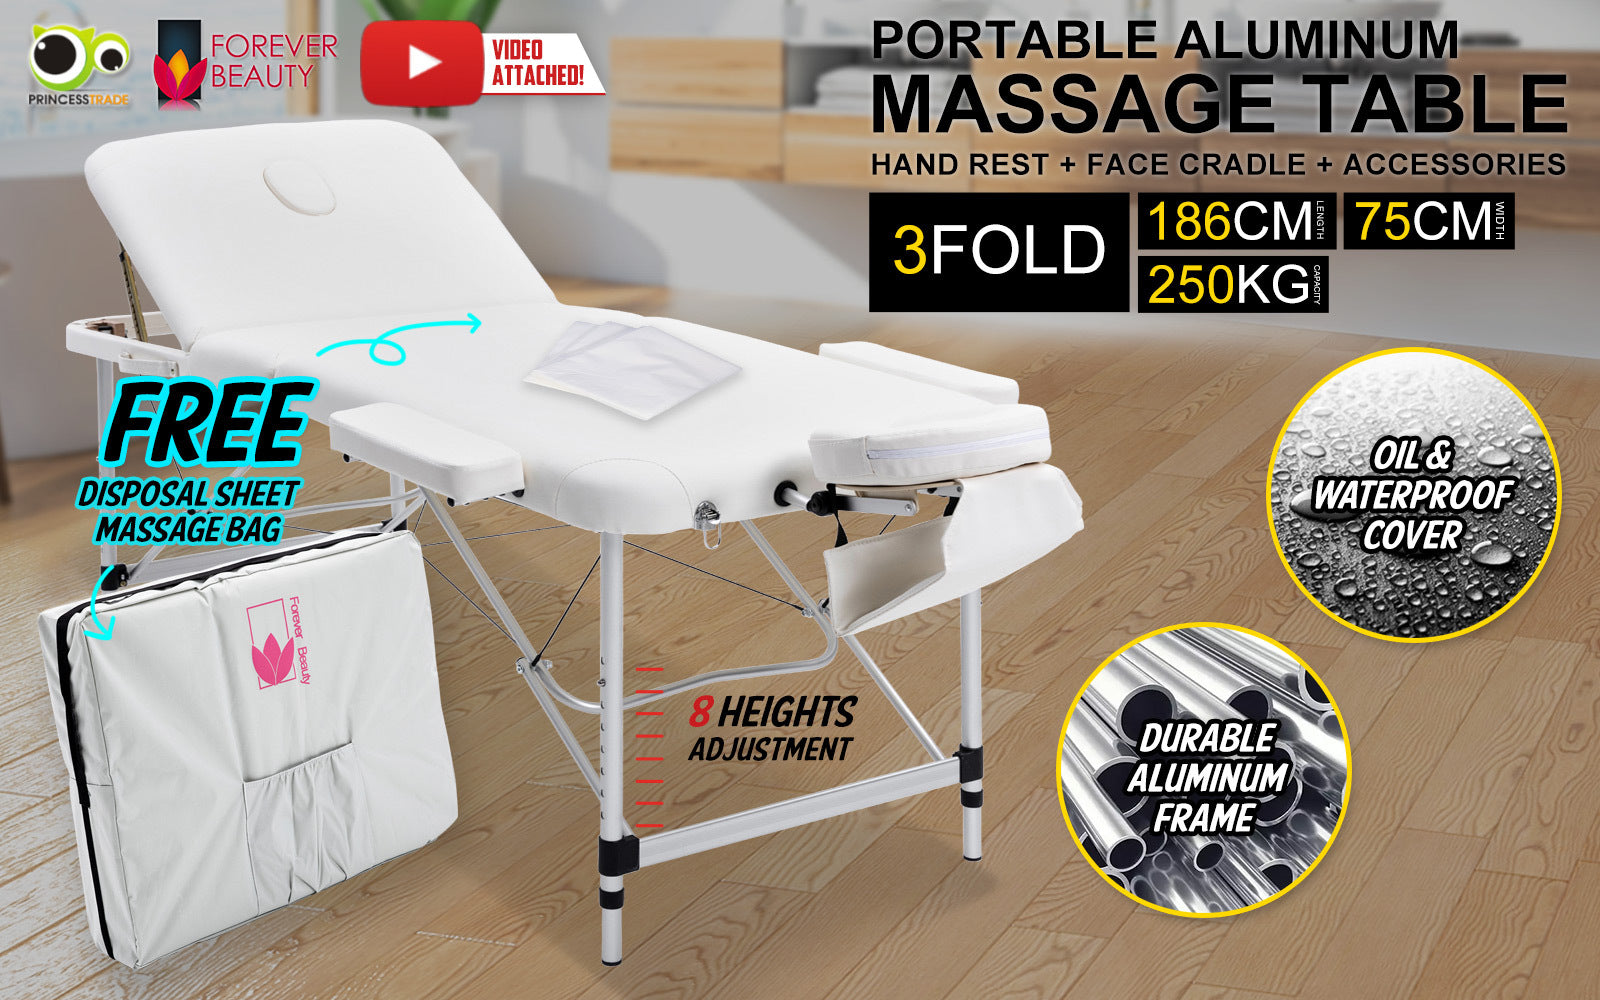 Forever Beauty White Portable Beauty Massage Table Bed Therapy Waxing 3 Fold 75cm Aluminium - SILBERSHELL